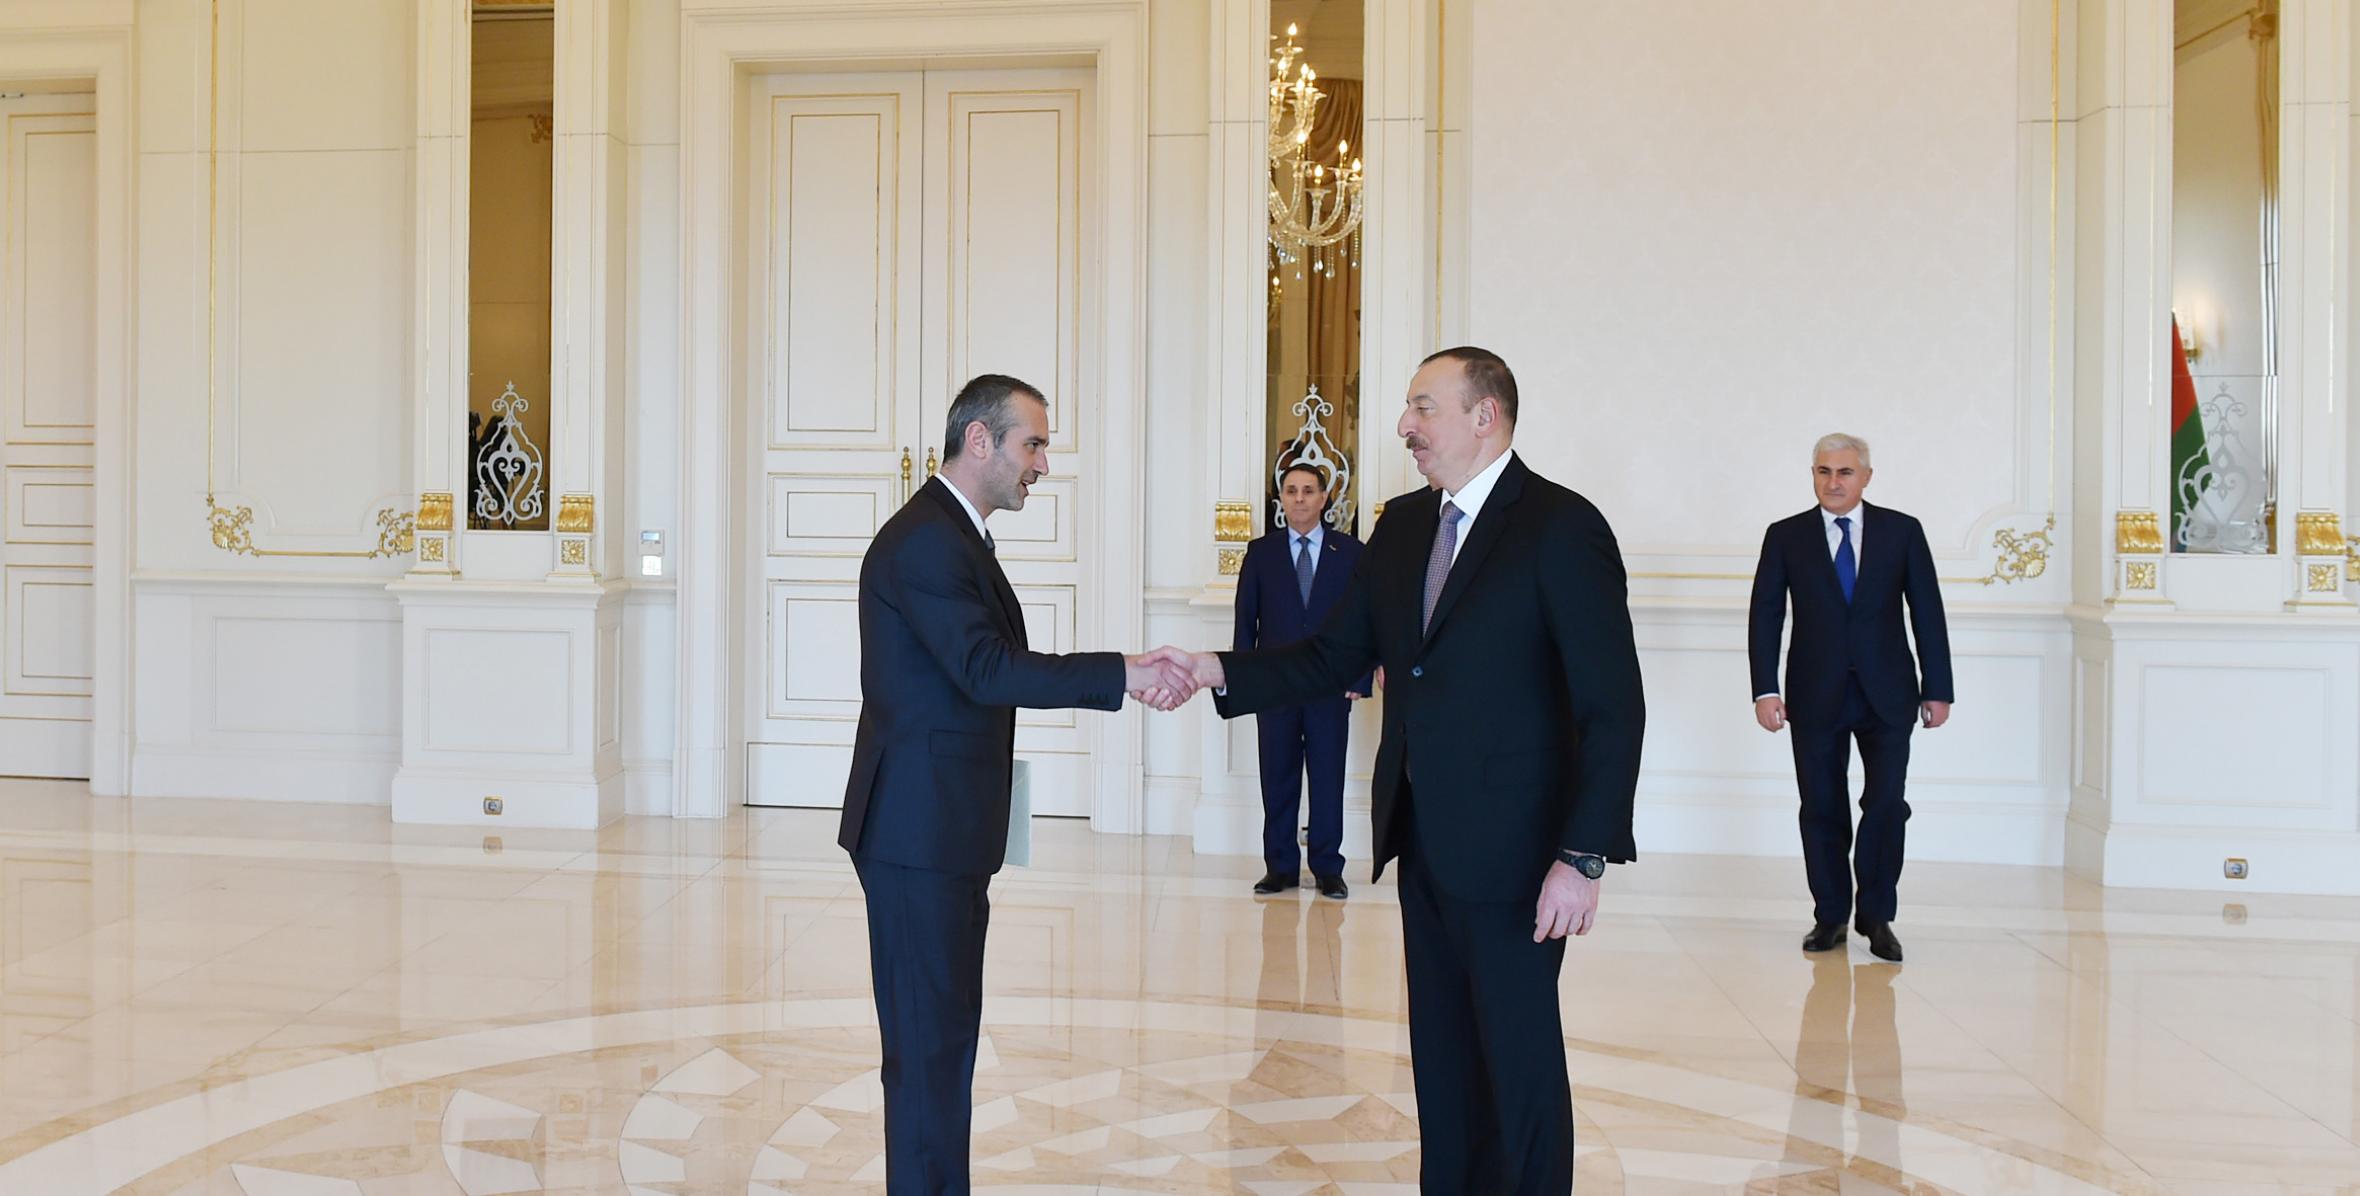 Ilham Aliyev received the credentials of the newly appointed Slovenian Ambassador